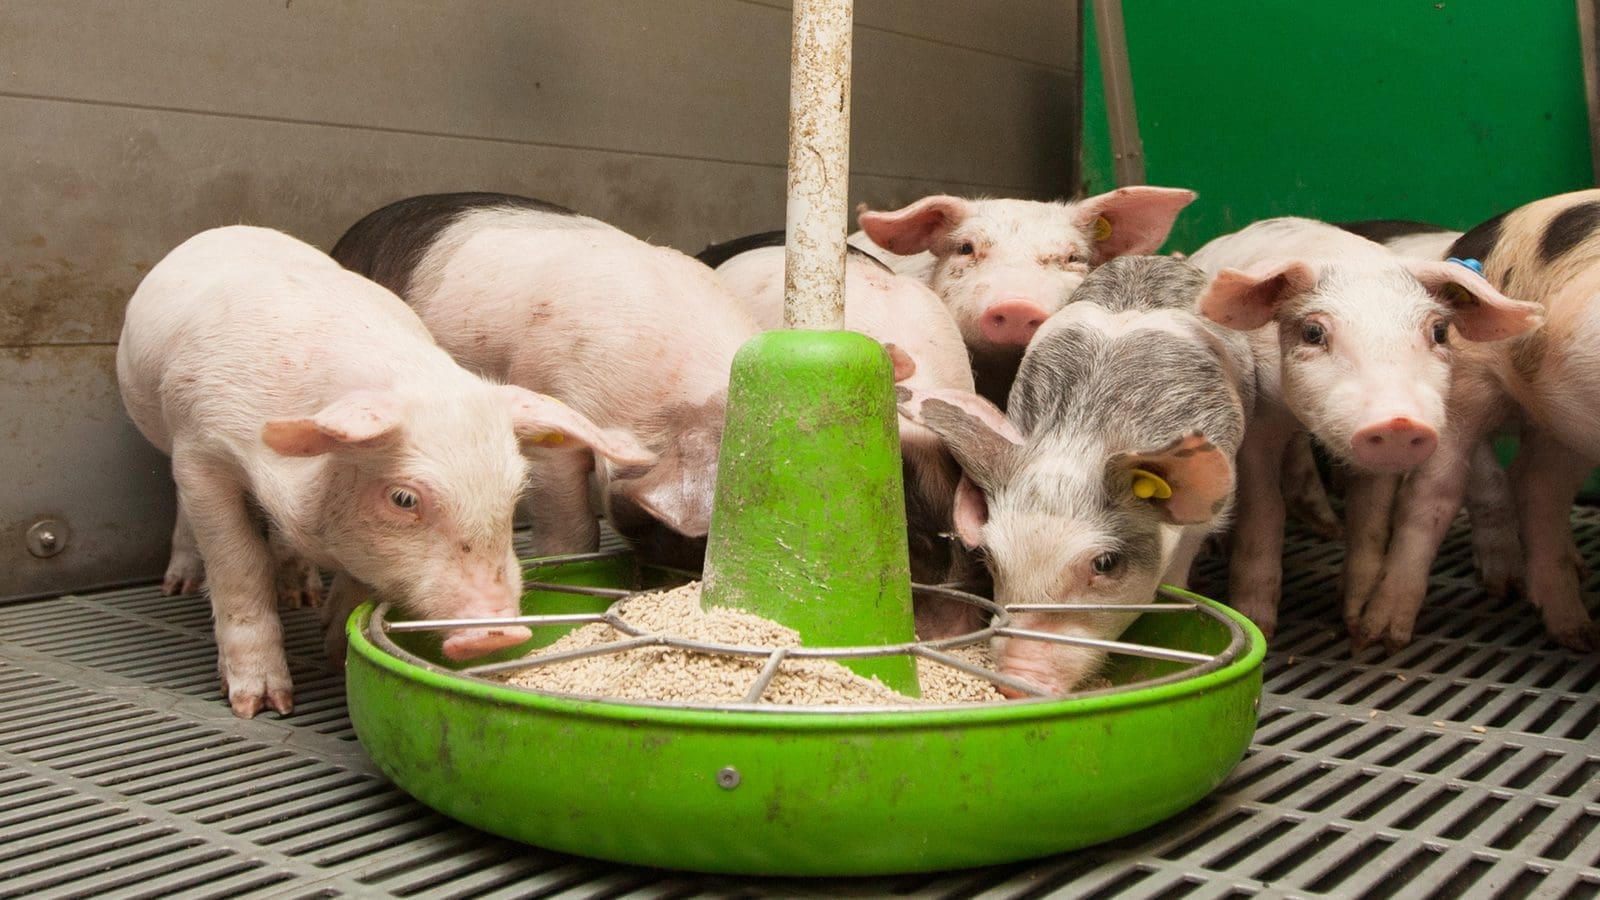 As African Swine Fever ravages pig drifts globally, formaldehyde may be the only hope for  feed plants, flags new study